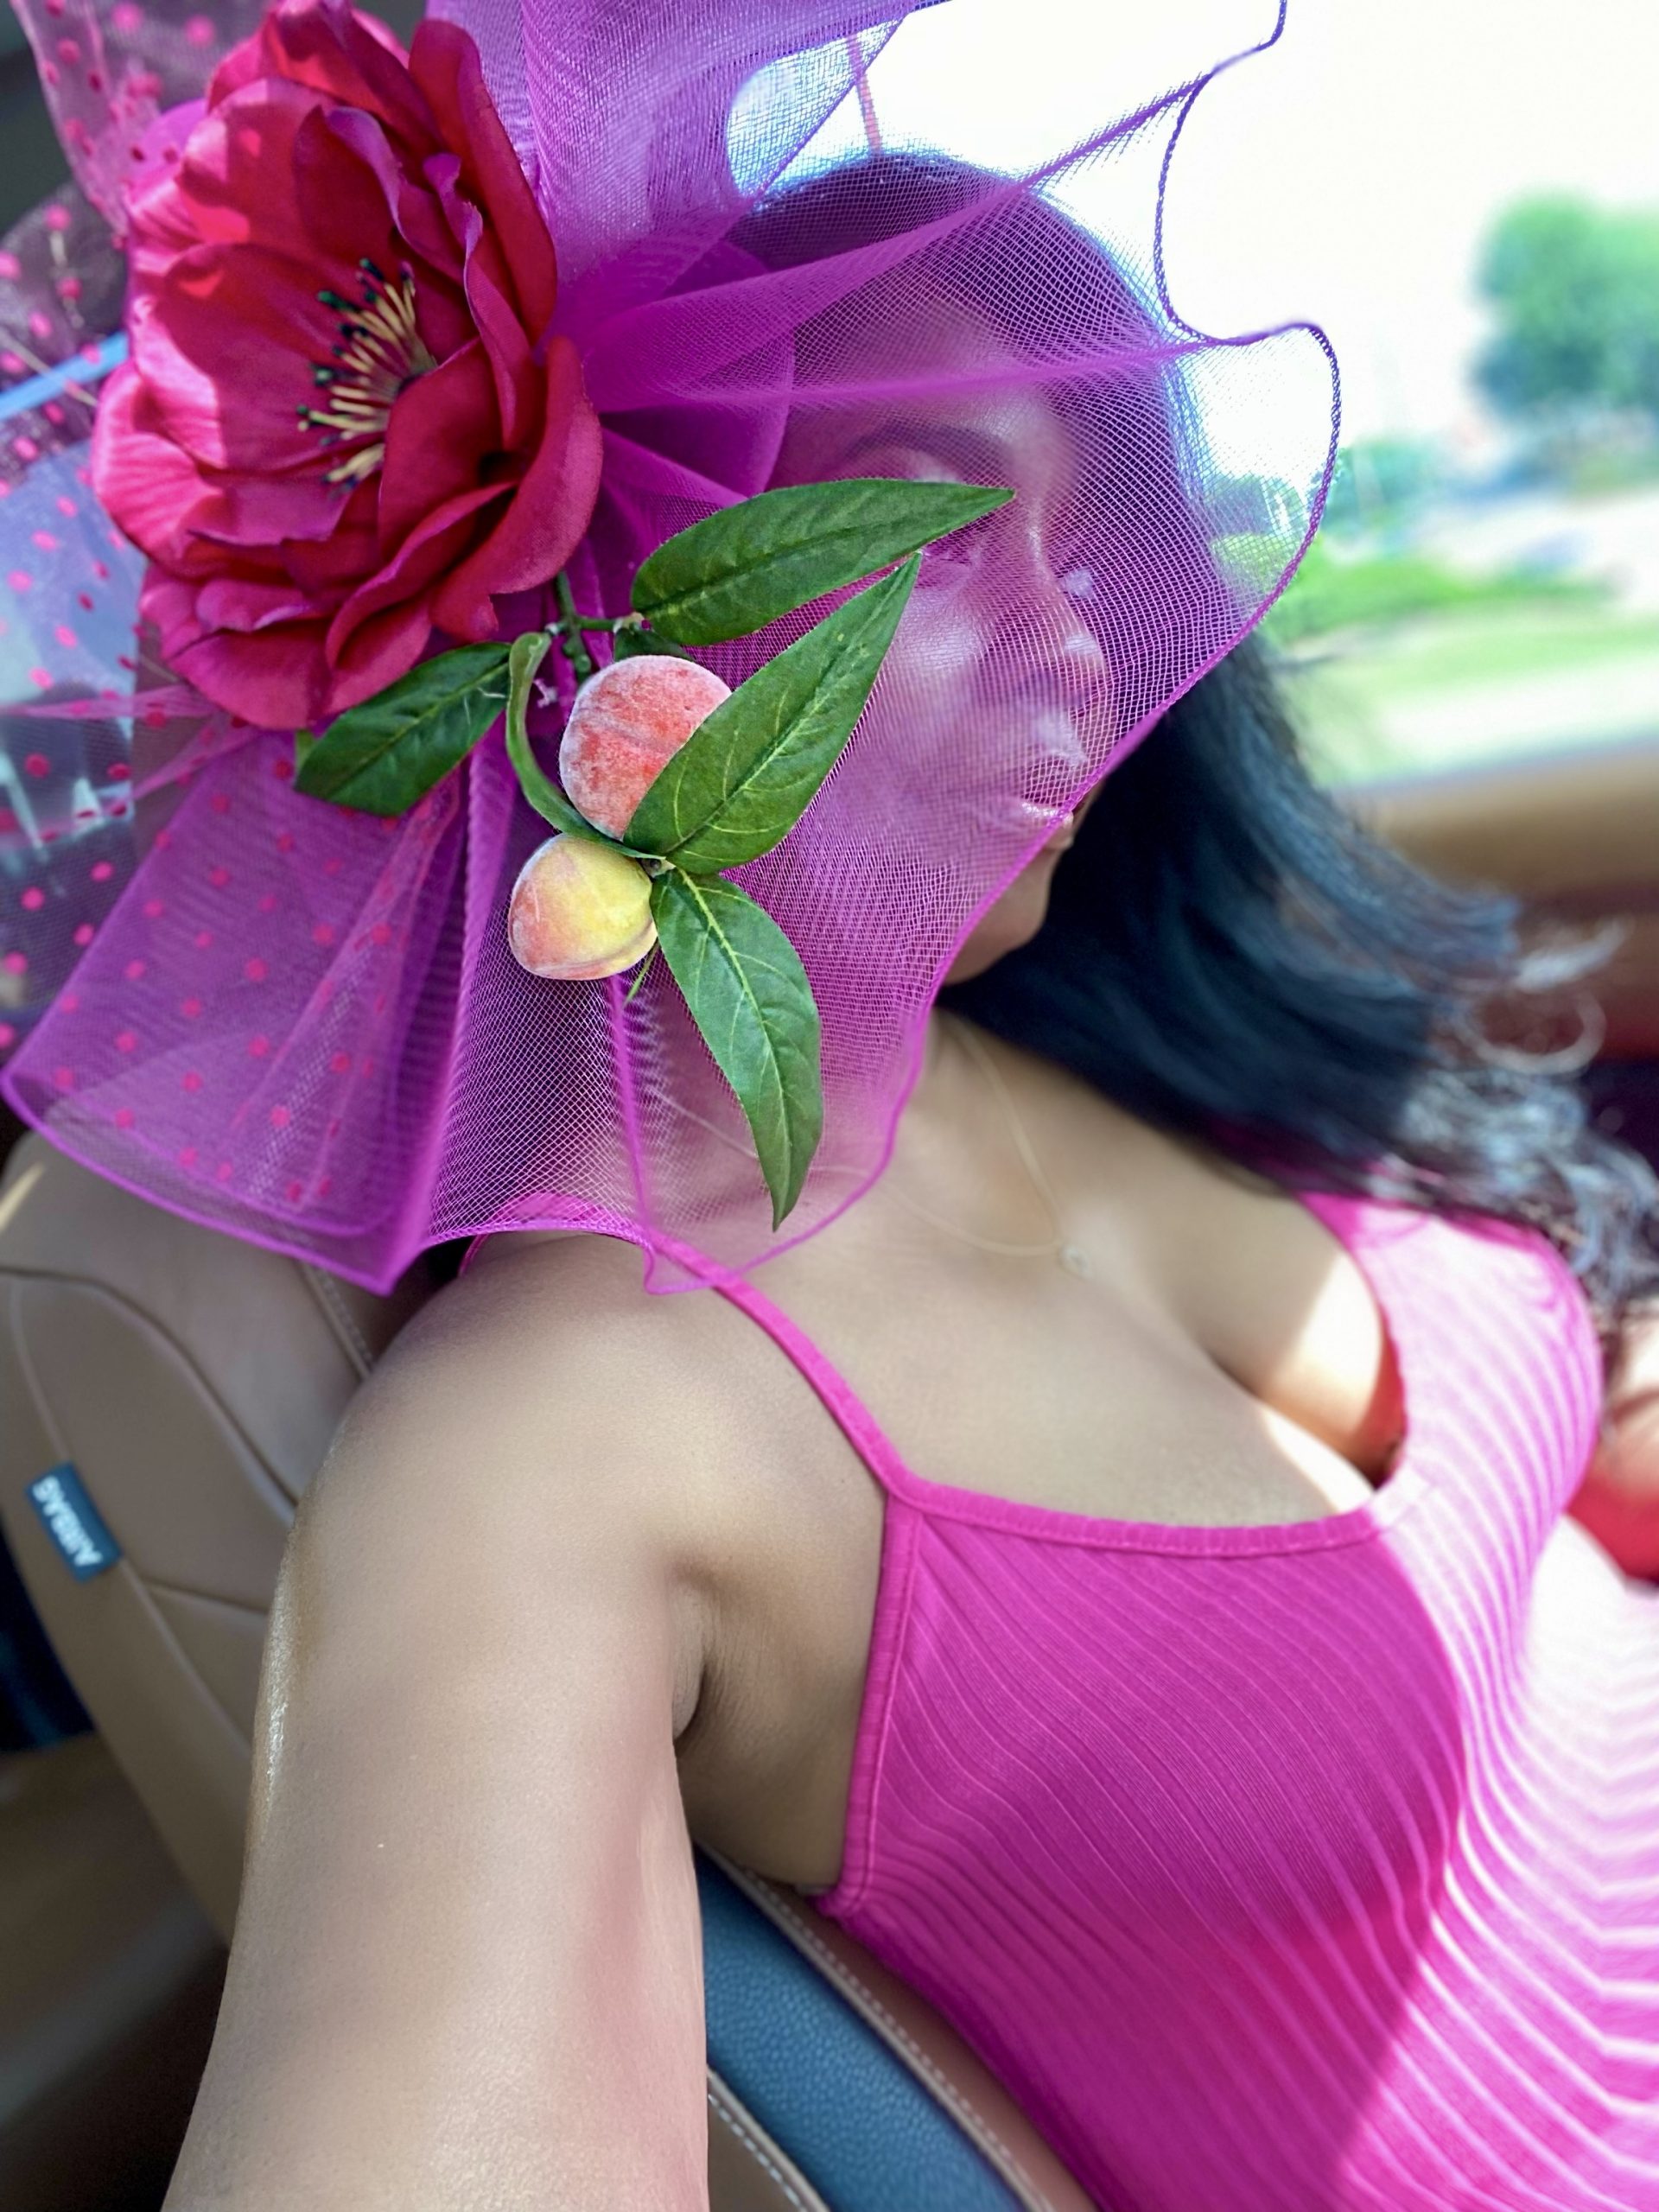 My Style: Ribbed Hot Pink Midi Dress & Floral Fascinator